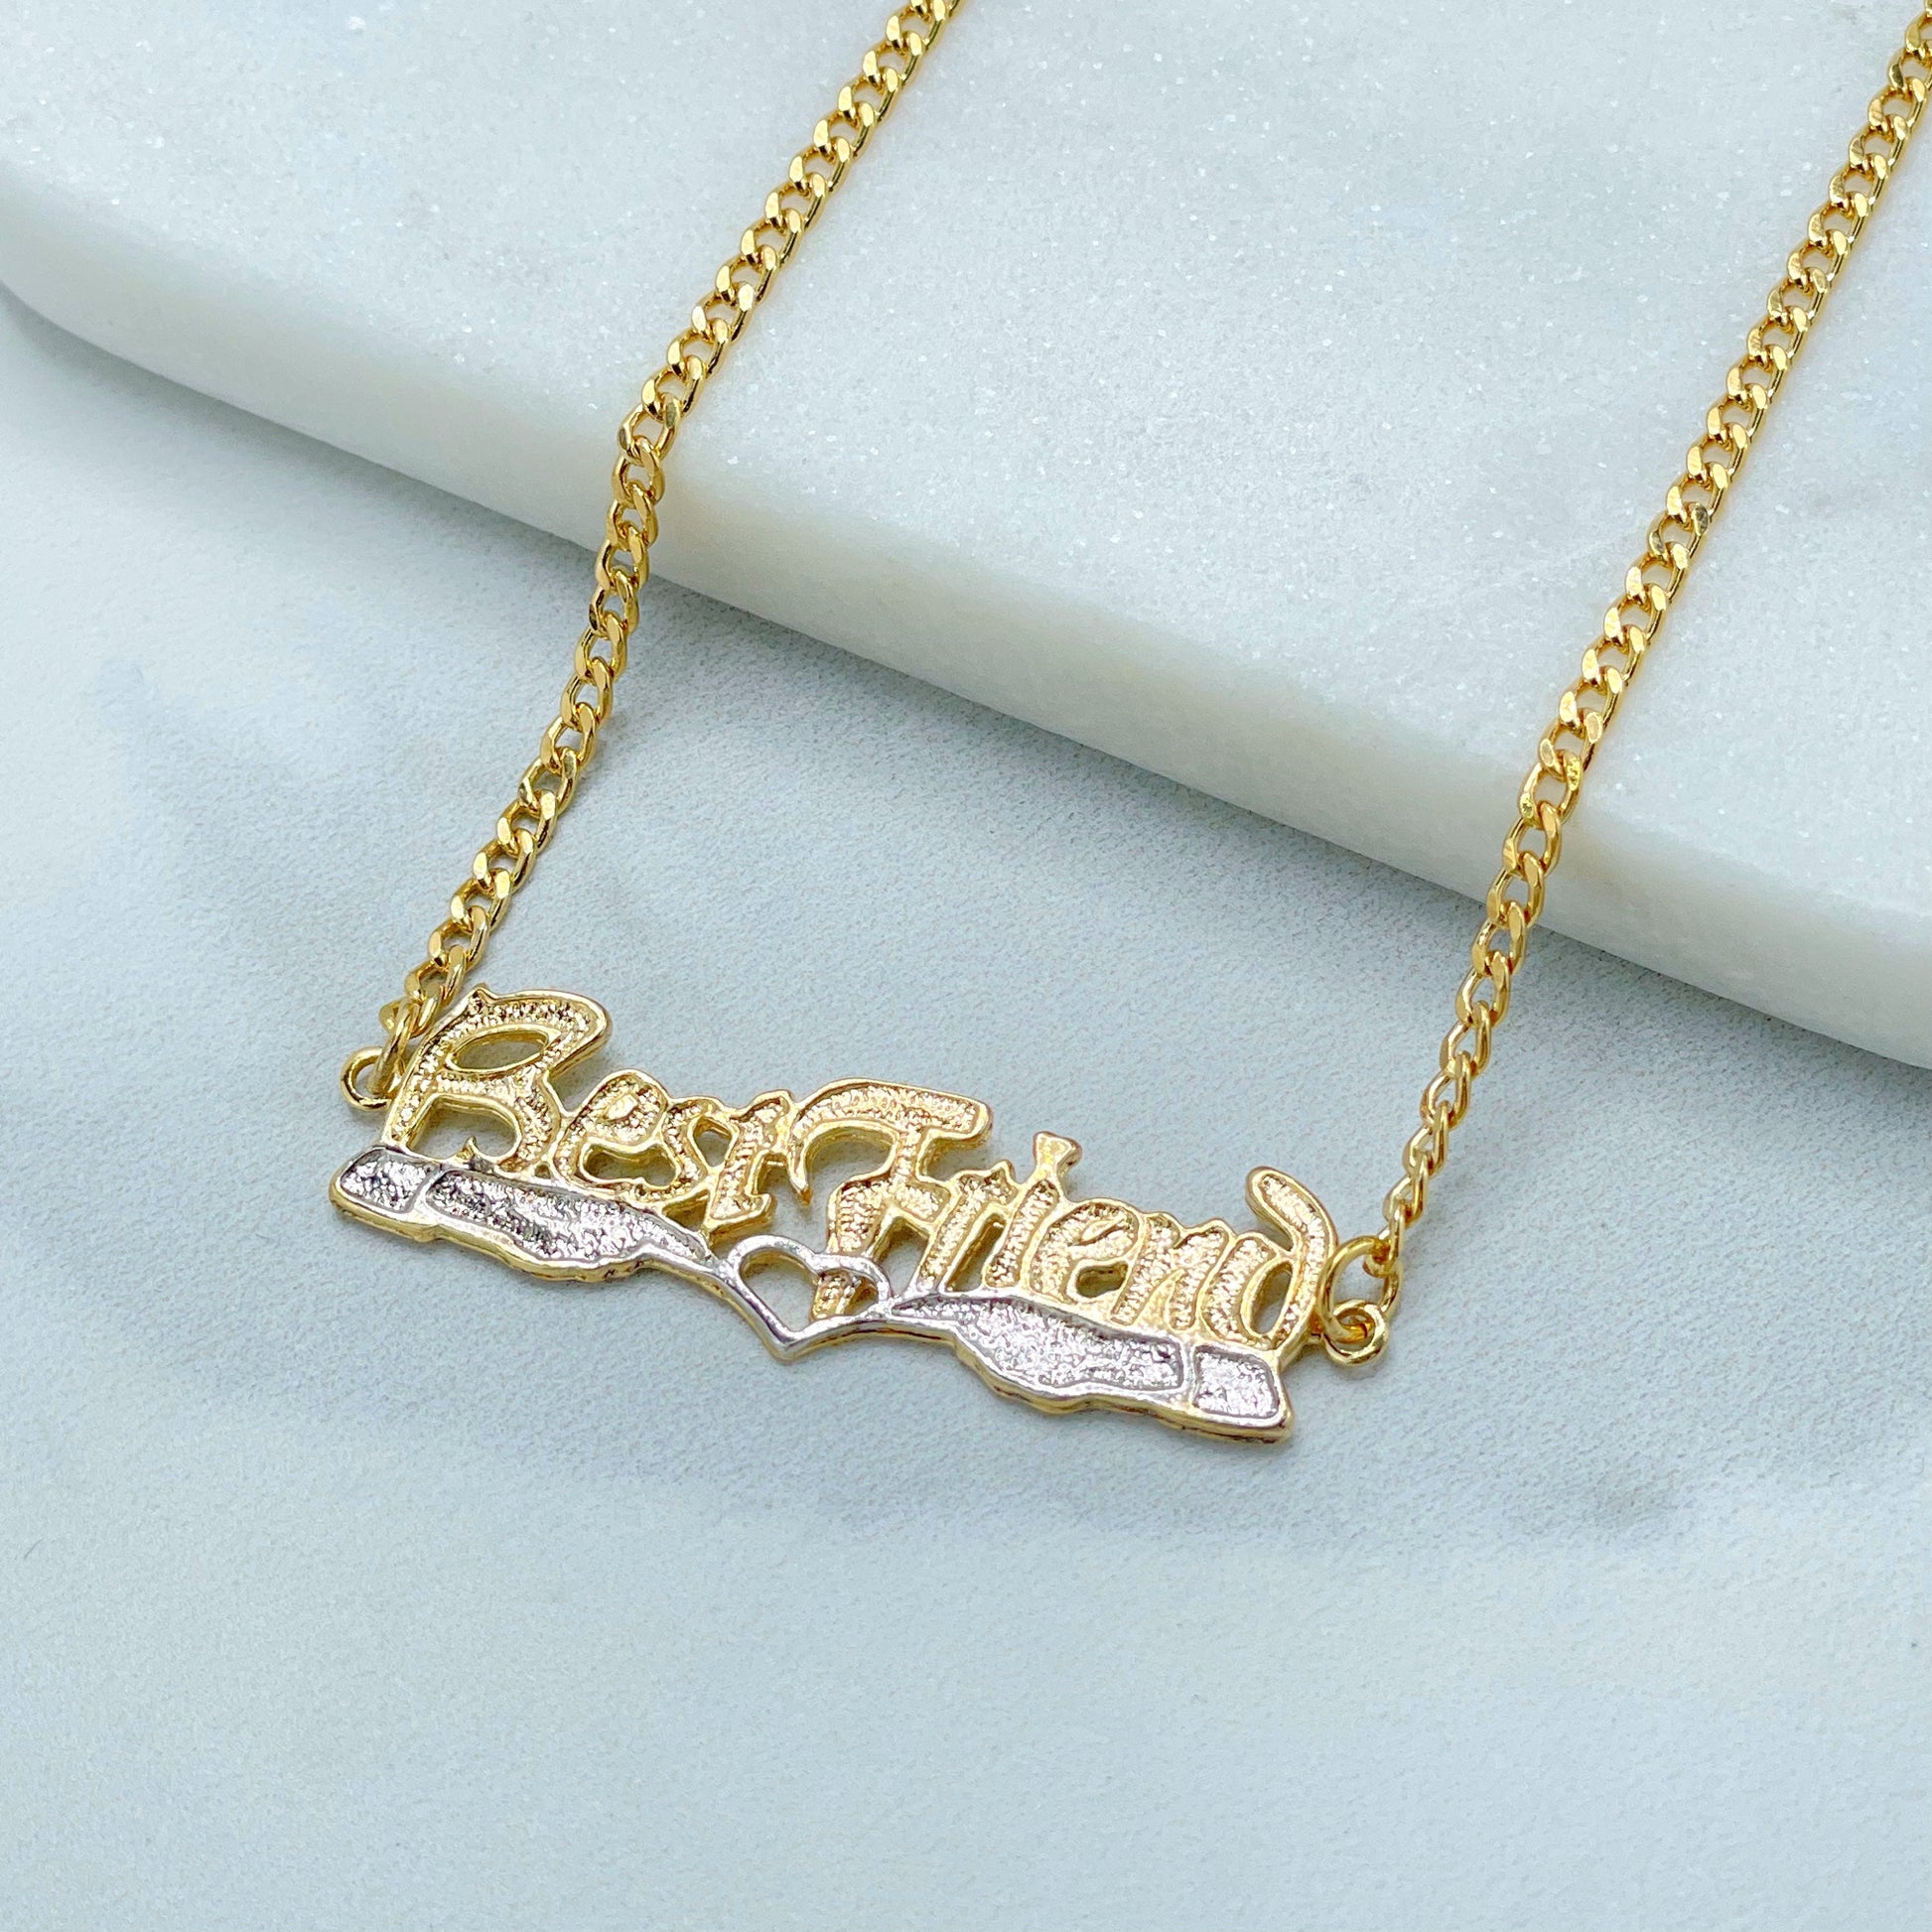 18k Gold Filled Fancy Best Fried Words Cuban Link Chain Necklace  Wholesale Jewelry Supplies